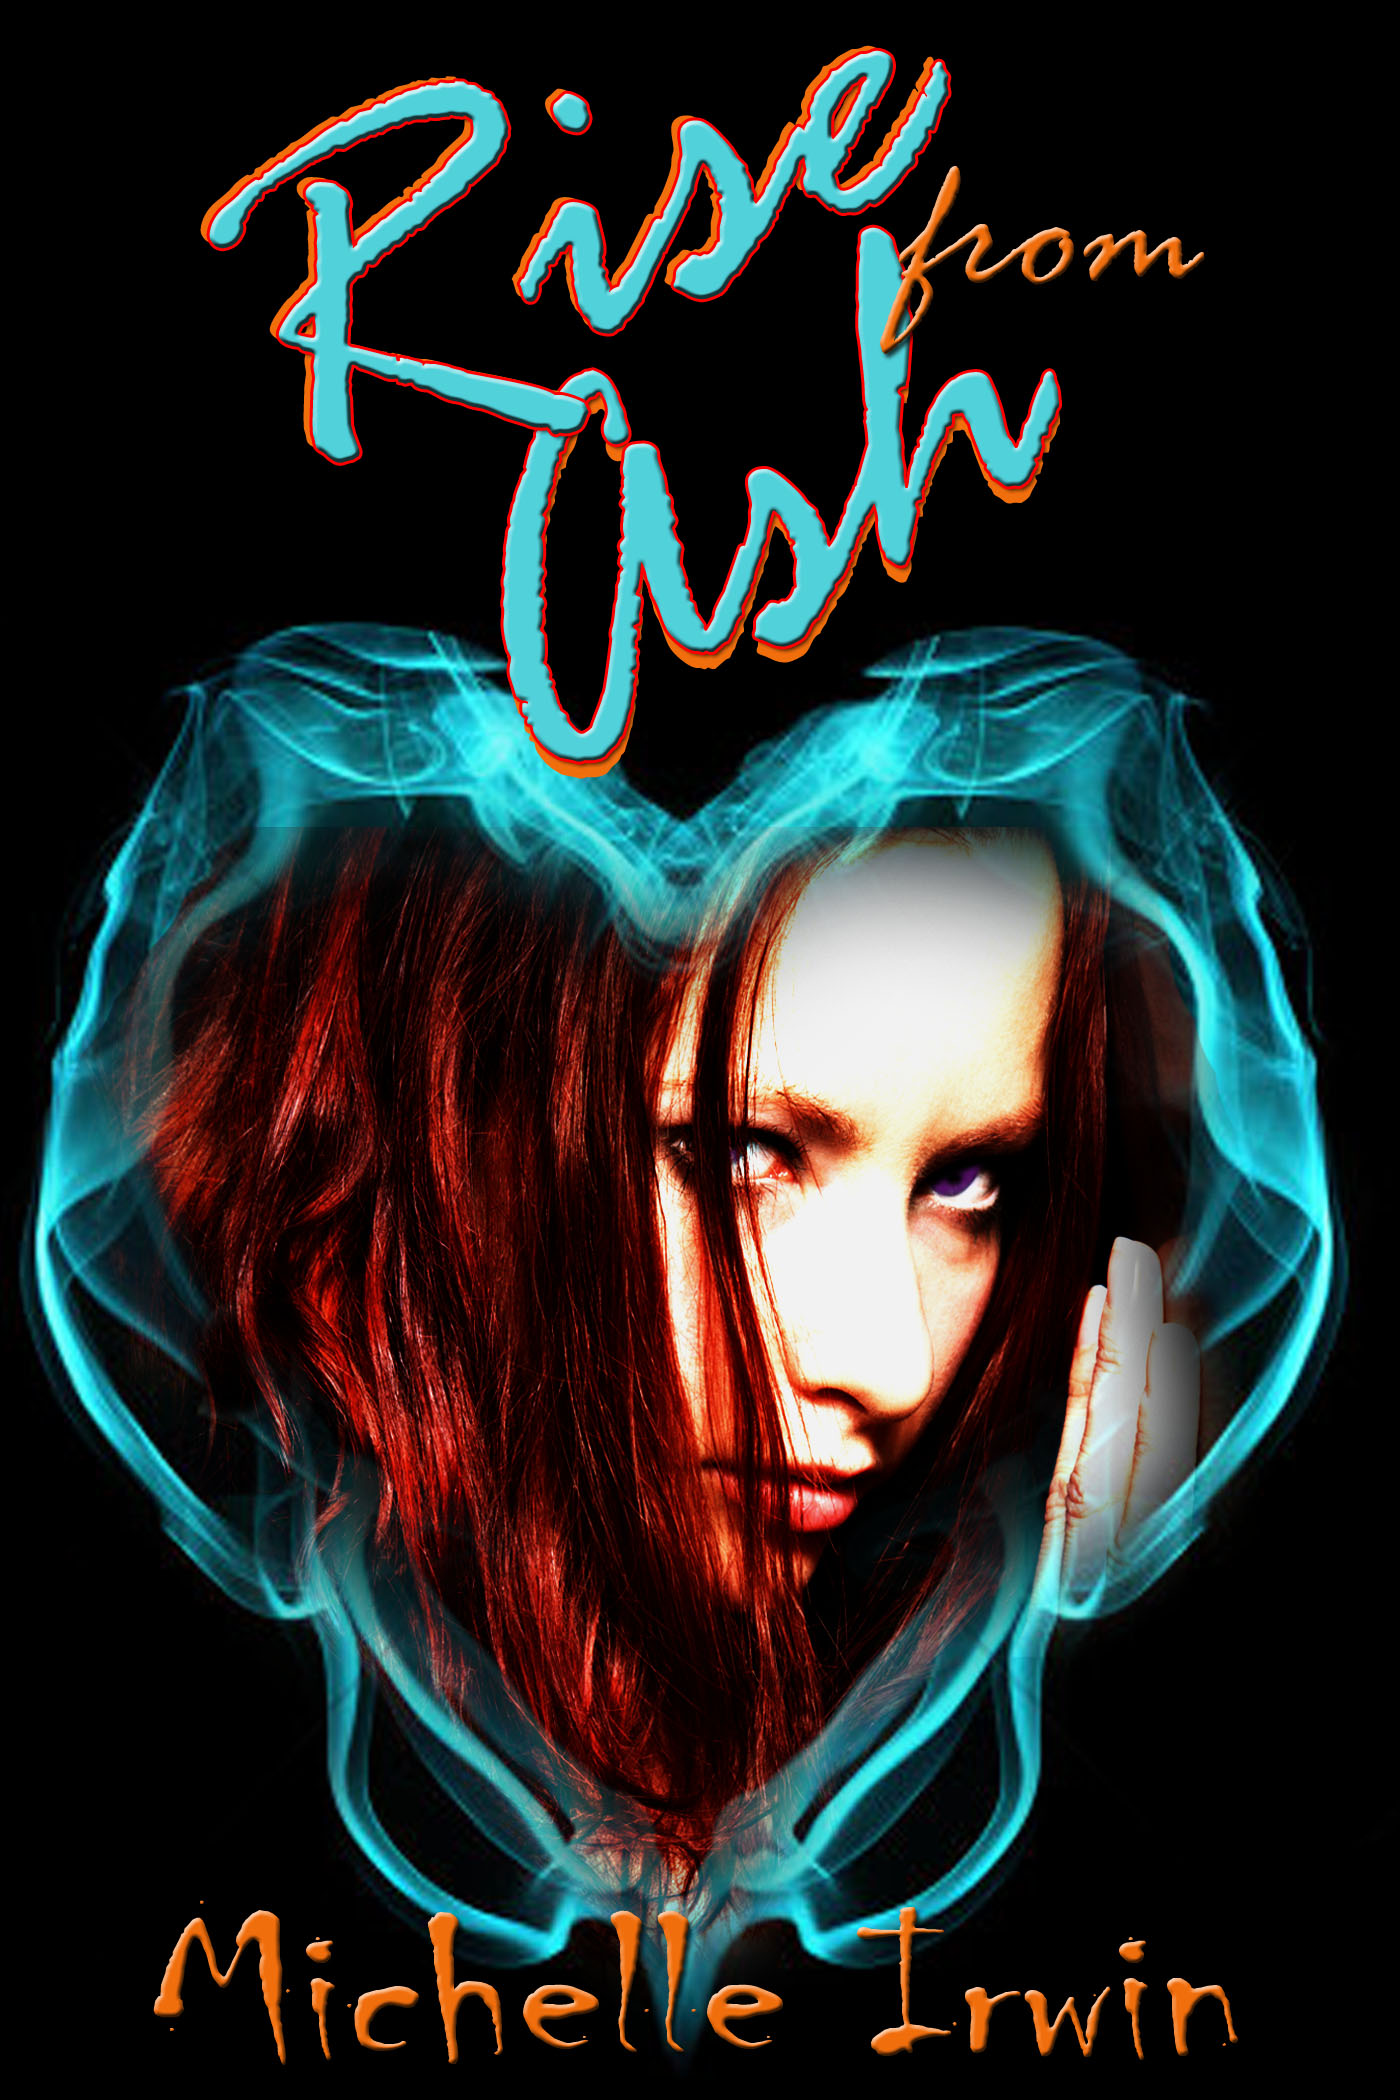 Rise from Ash ebook cover copy